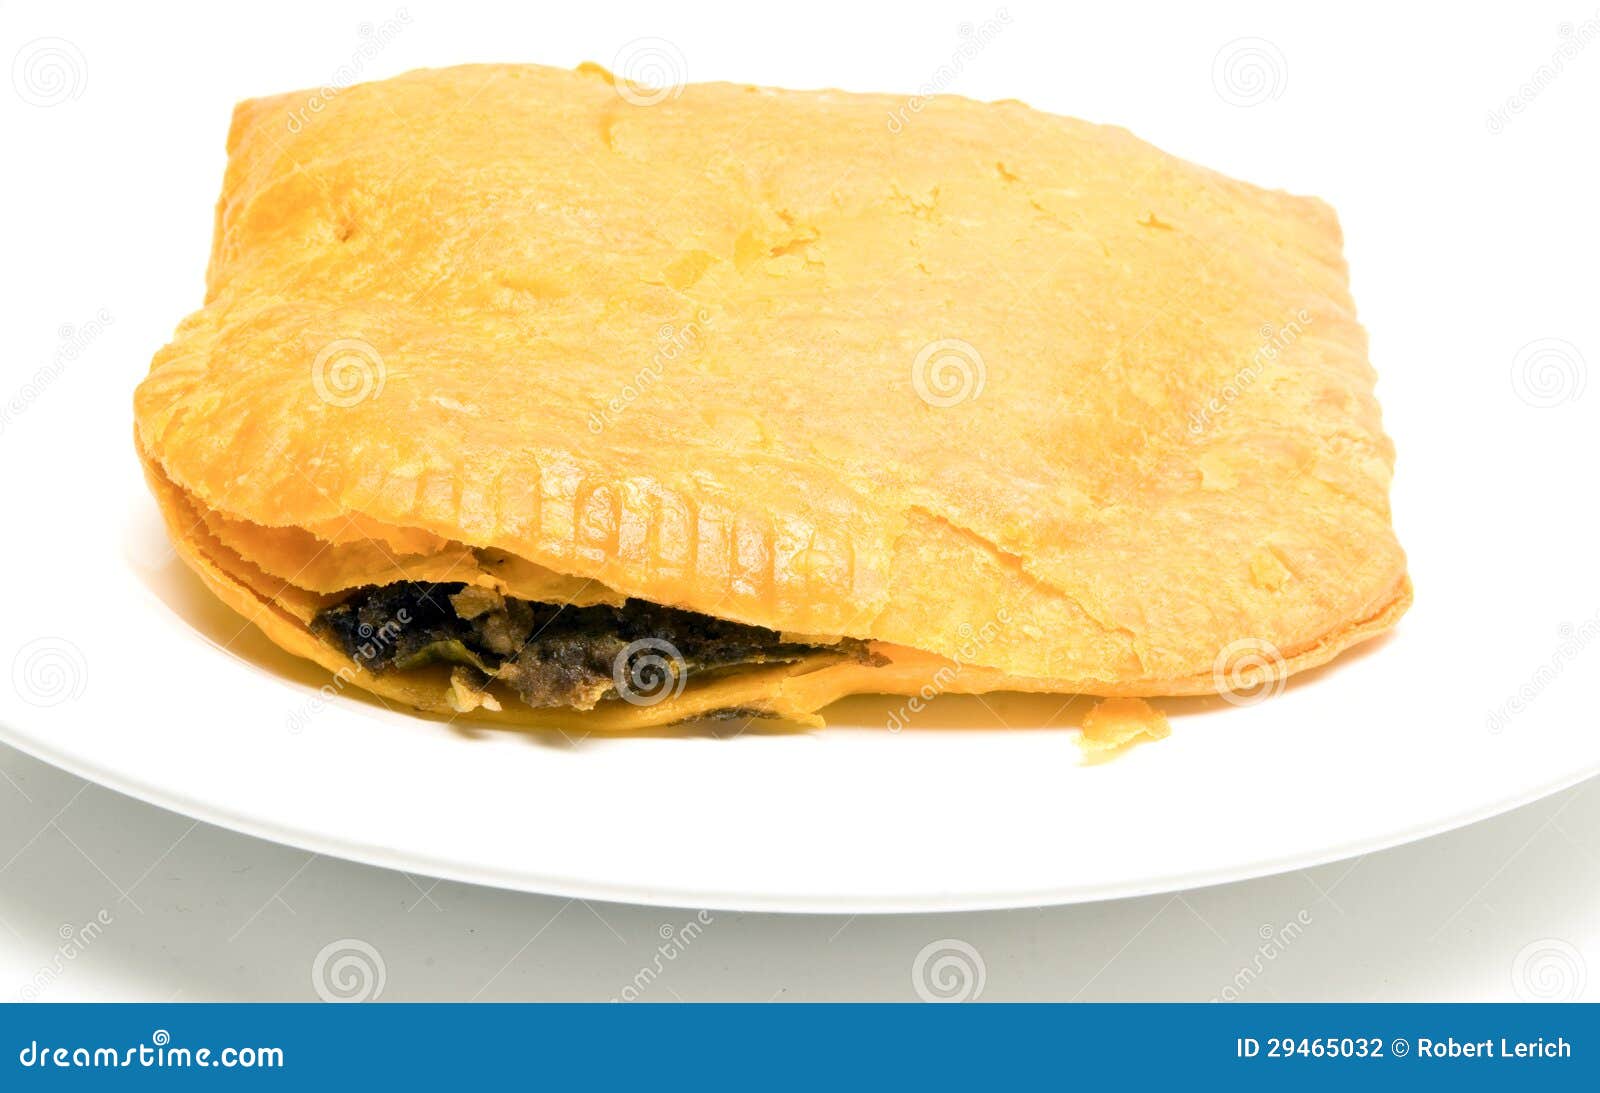 jamaican beef pattie patty fried pastry food